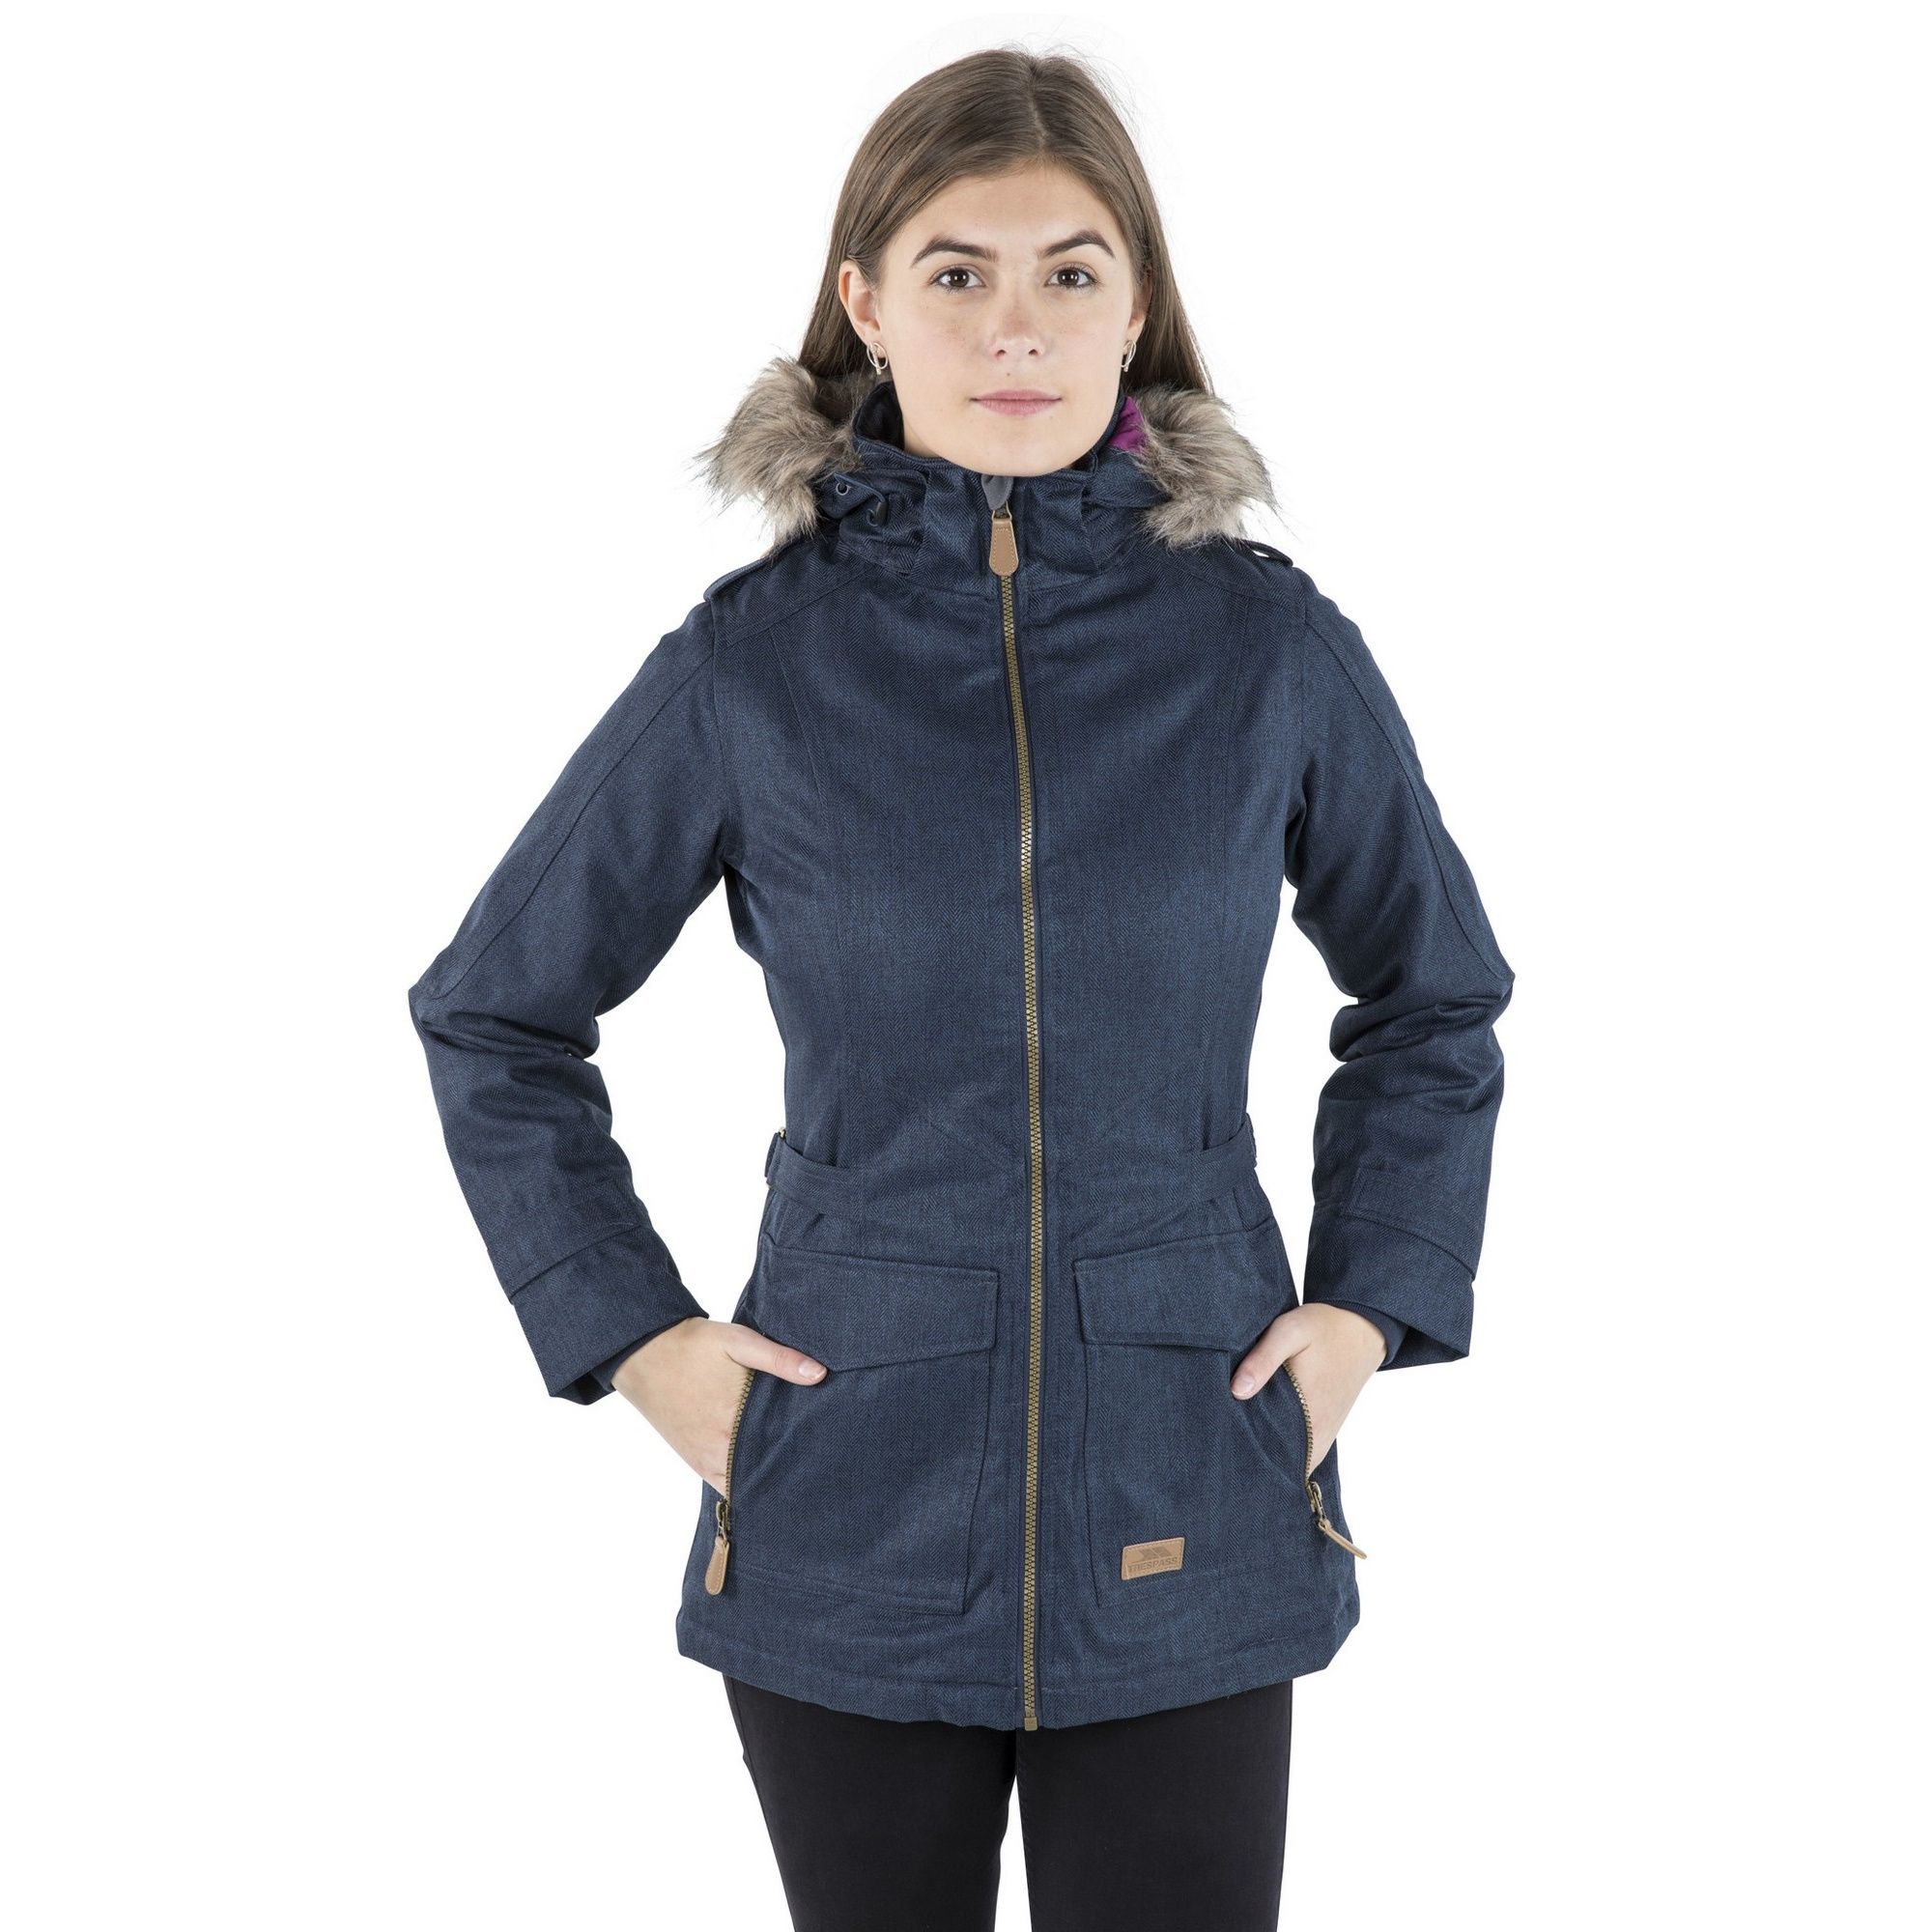 Padded. Textured fabric. Contrast linings. Adjustable zip off hood. Removable fake fur hood trim. 2 zip pockets. Adjustable waist tabs. Inner knitted cuff. Inner storm flap. Waterproof 3000mm, windproof, taped seams. Shell: 100% Polyester, TPU membrane, Lining: 100% Polyester, Filling: 100% Polyester. Trespass Womens Chest Sizing (approx): XS/8 - 32in/81cm, S/10 - 34in/86cm, M/12 - 36in/91.4cm, L/14 - 38in/96.5cm, XL/16 - 40in/101.5cm, XXL/18 - 42in/106.5cm.